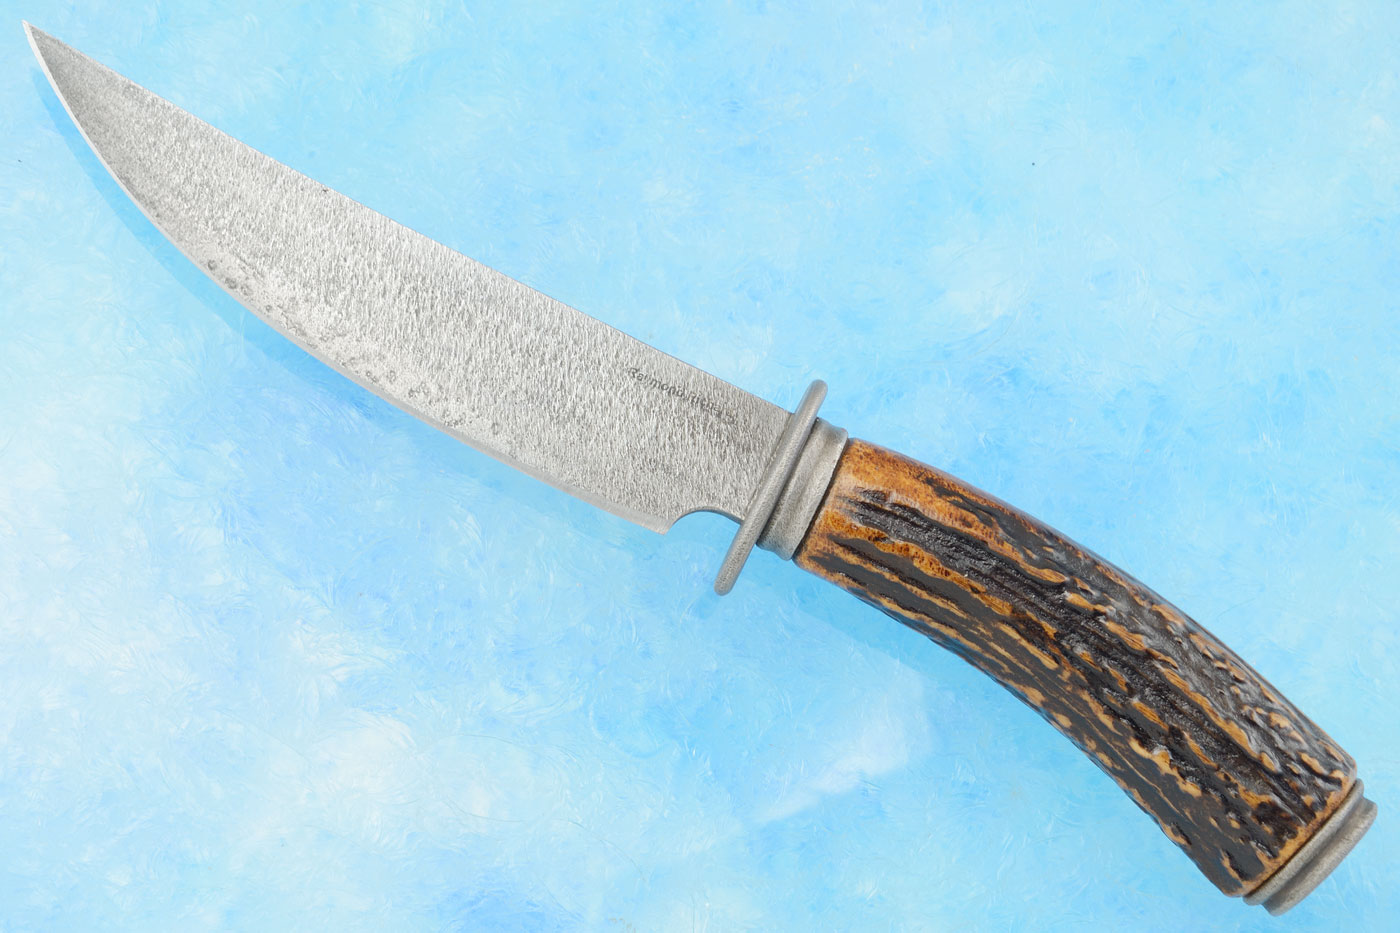 Upswept Skinner with Stag and Wrought Iron